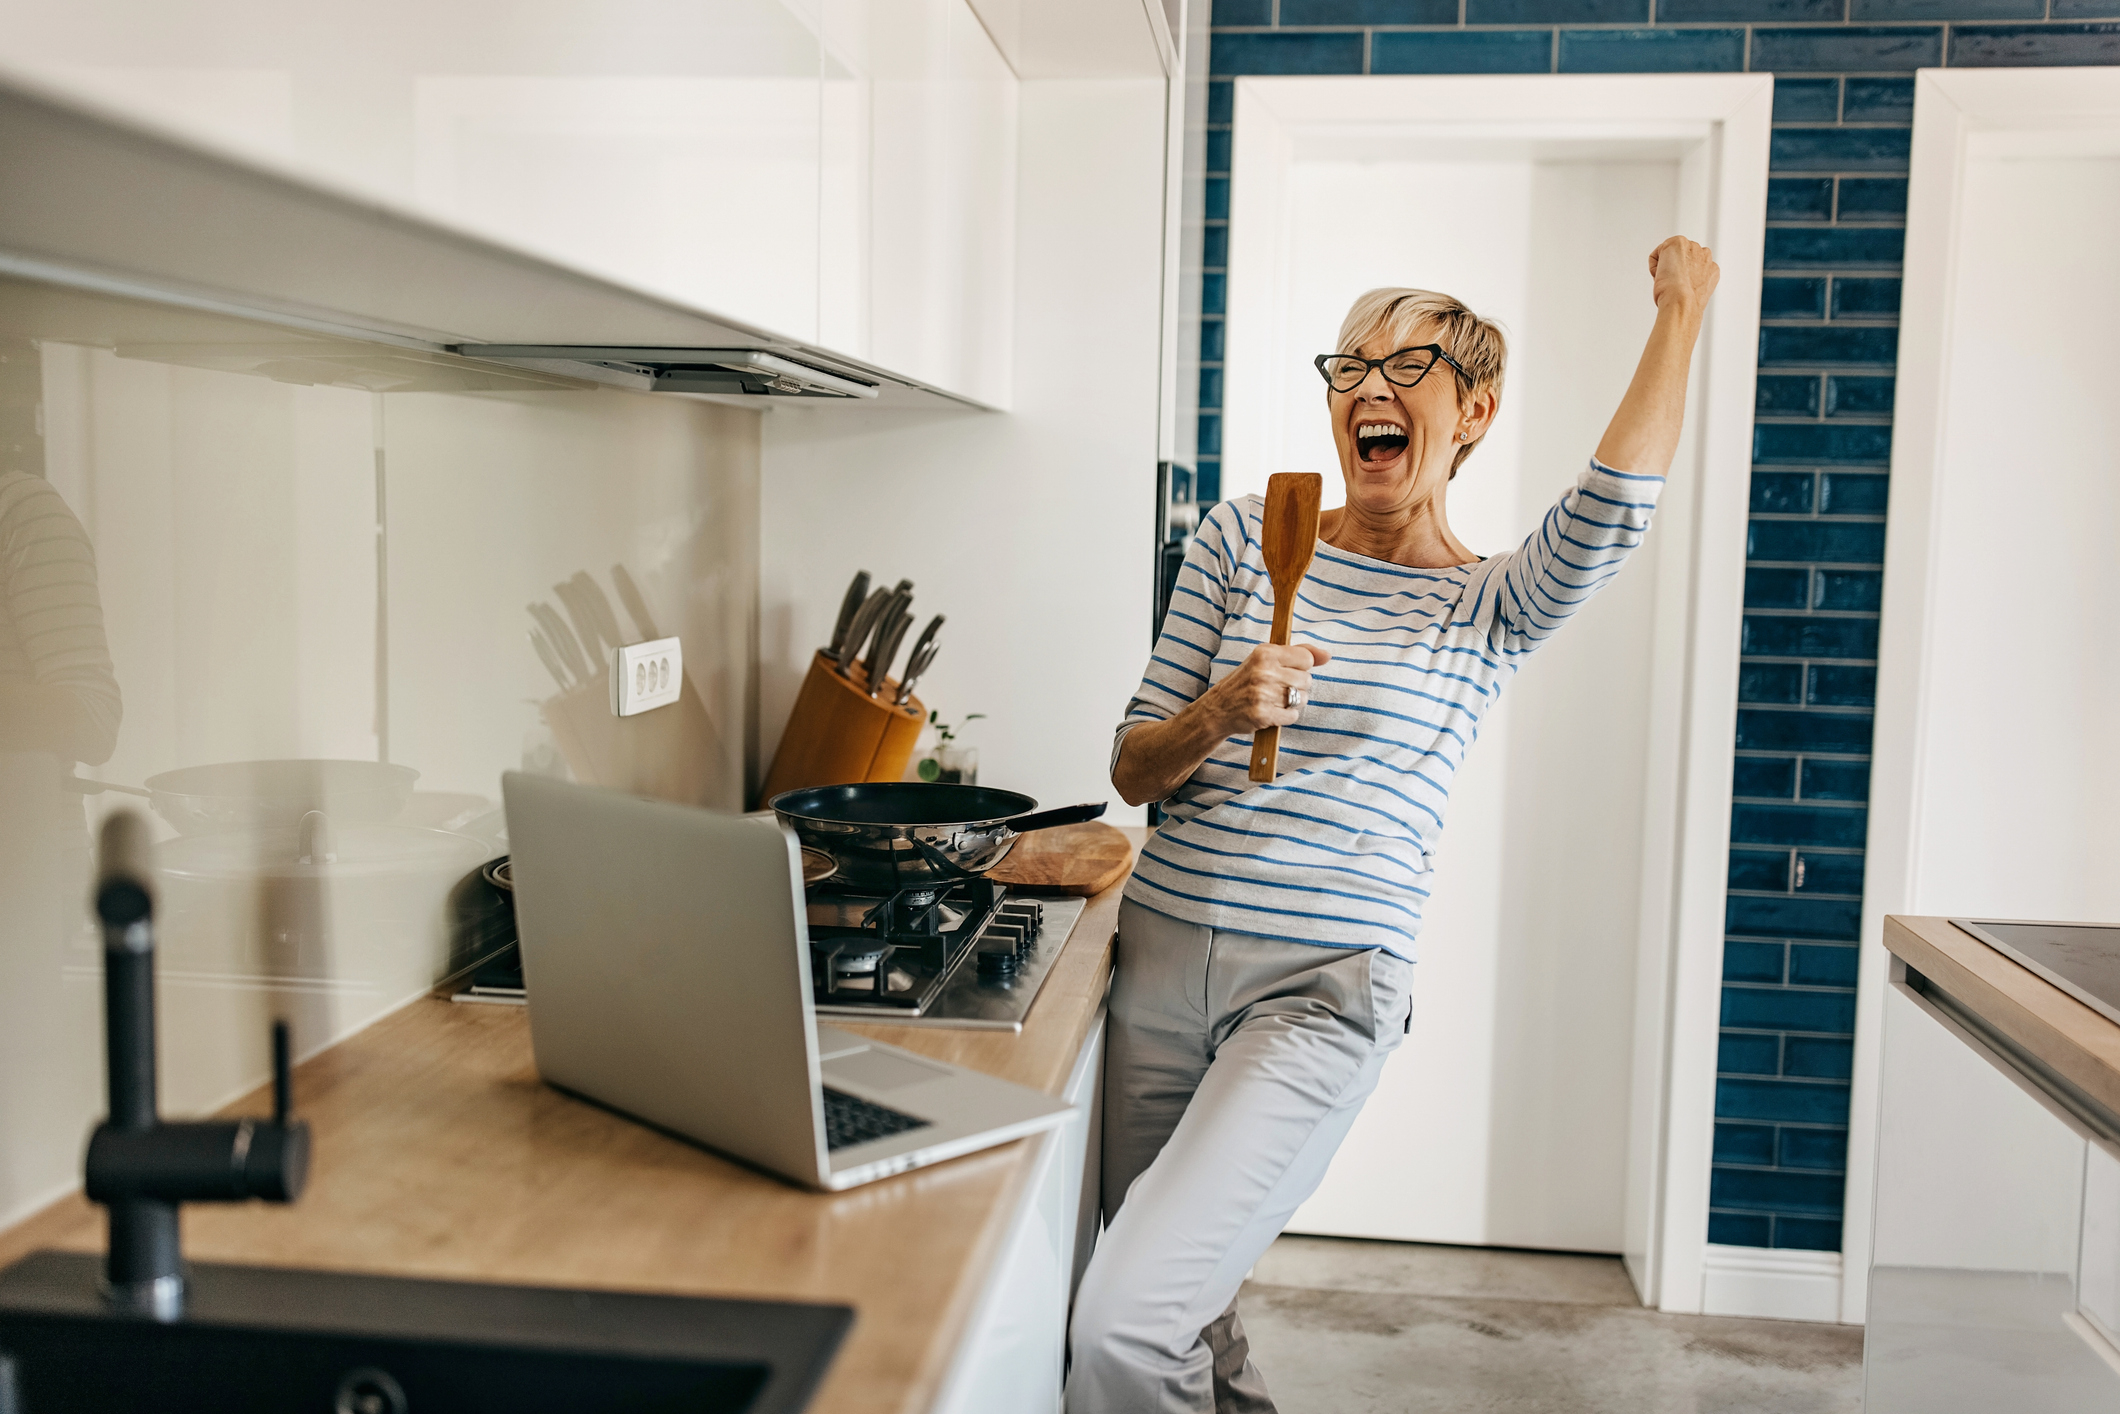 A person joyfully holds a wooden spoon in one hand and raises a fist in the other while standing in a modern kitchen beside a laptop on the counter